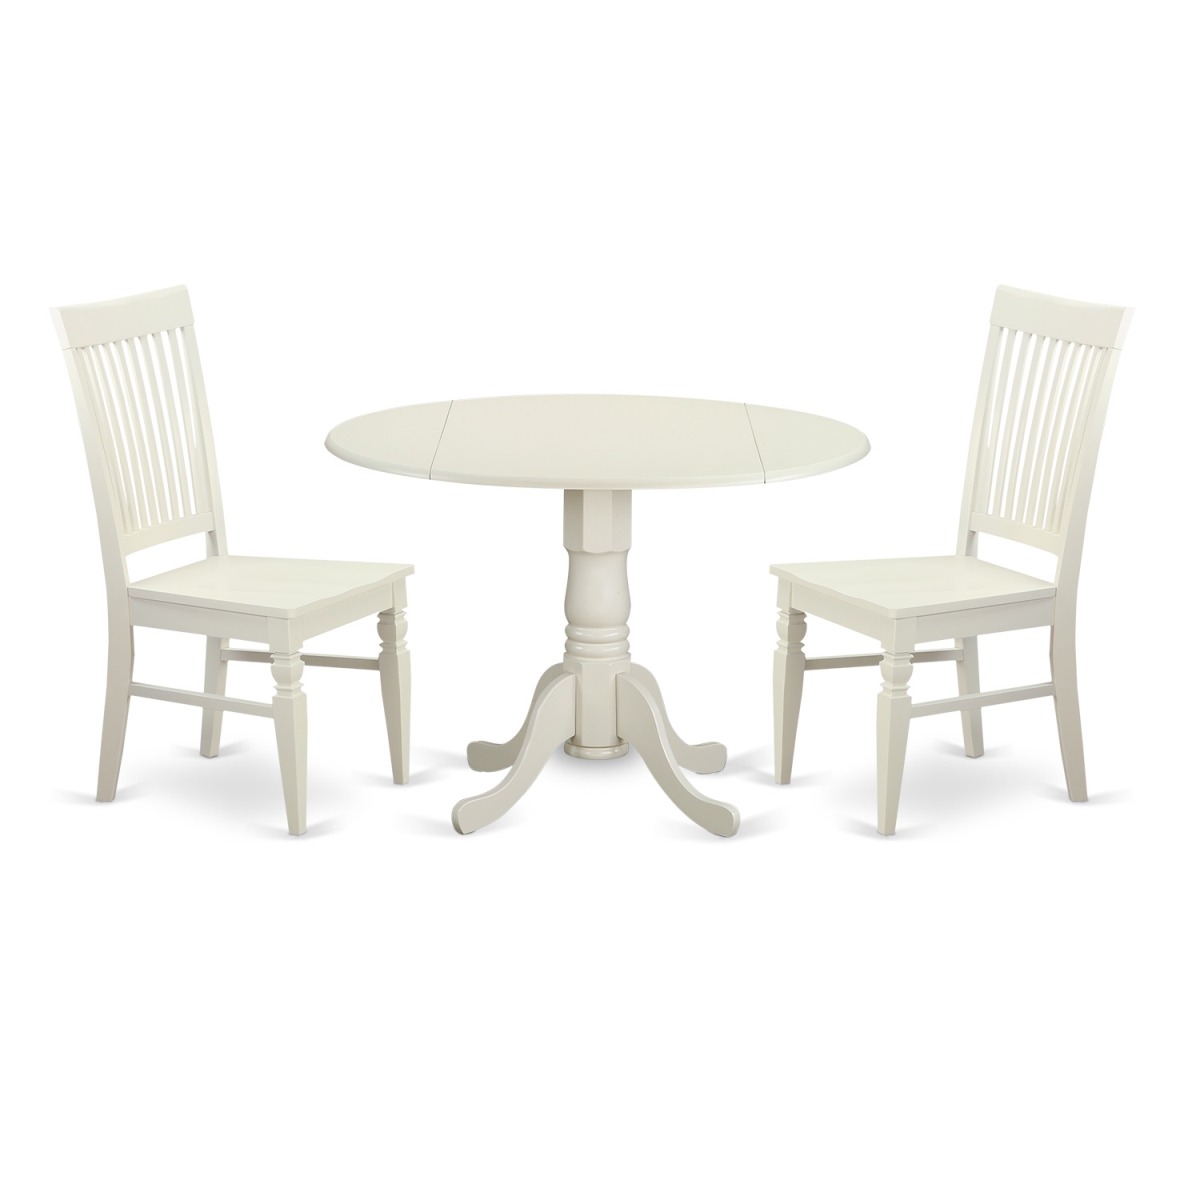 Picture of East West Furniture DLWE3-WHI-W Dining Room Set with 2 Kitchen Table & 2 Chairs, Linen White - 3 Piece